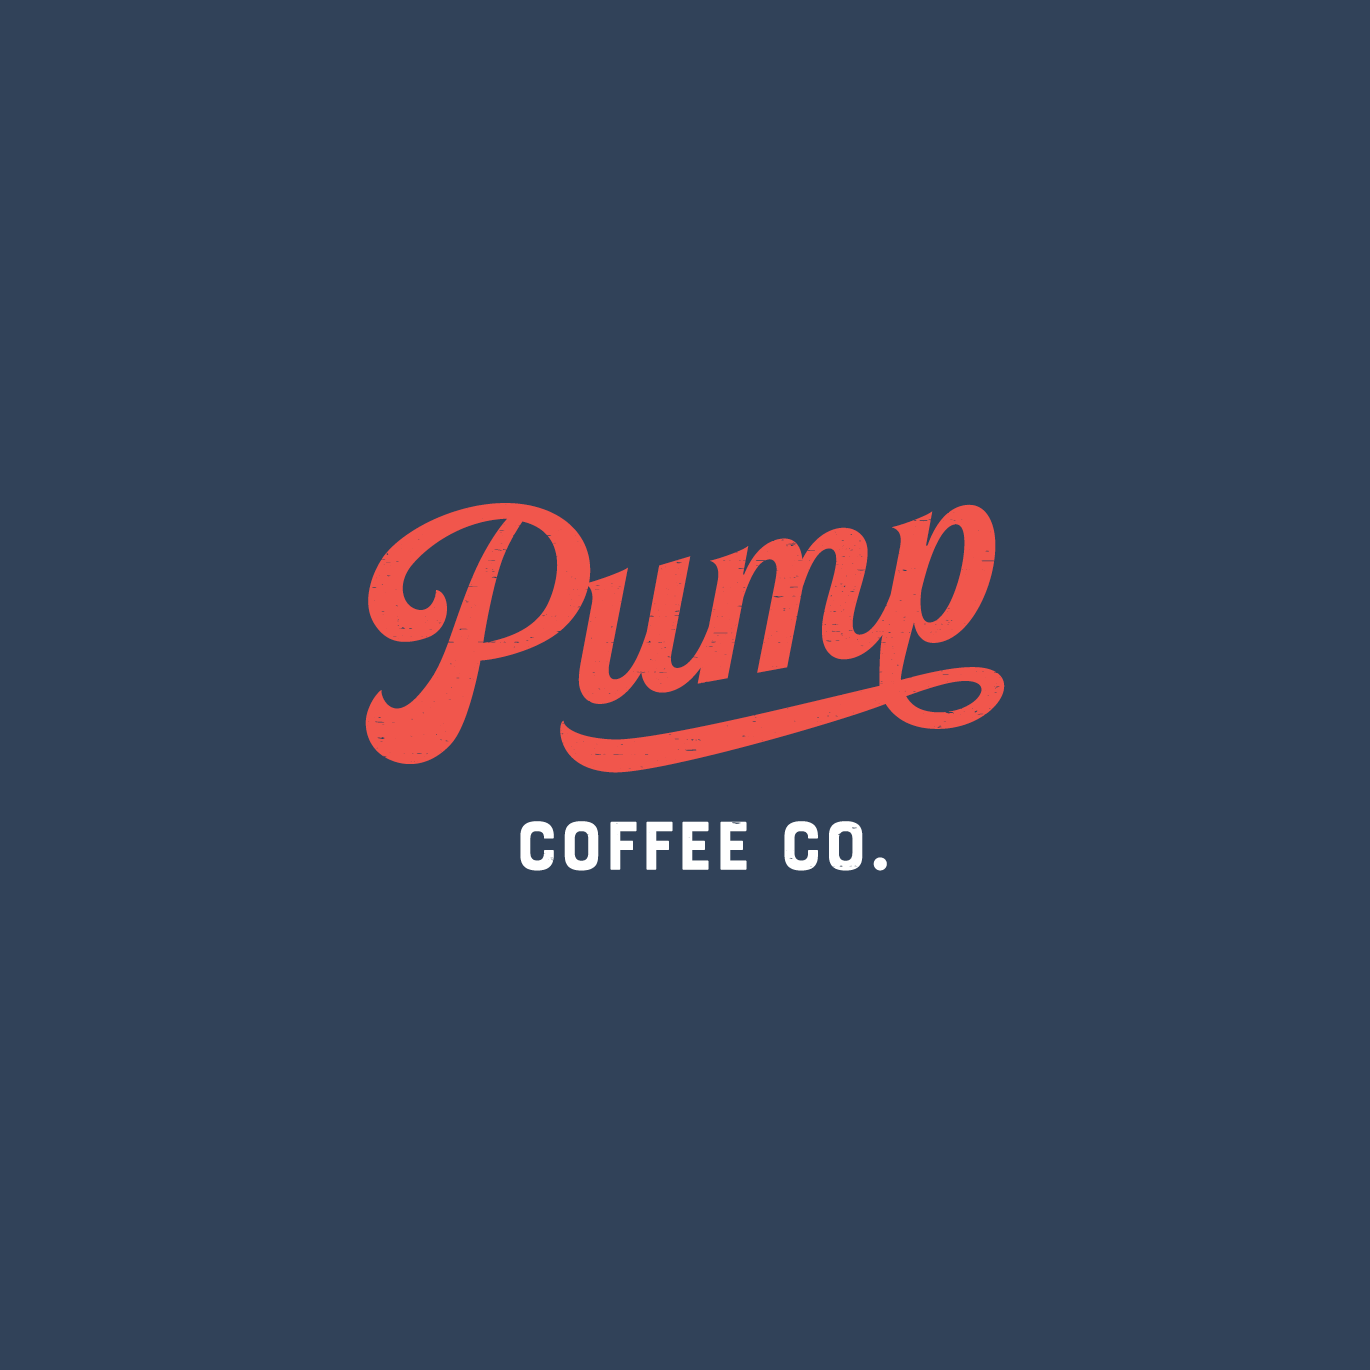 Pump Coffee Co logo by Squeeze Creative